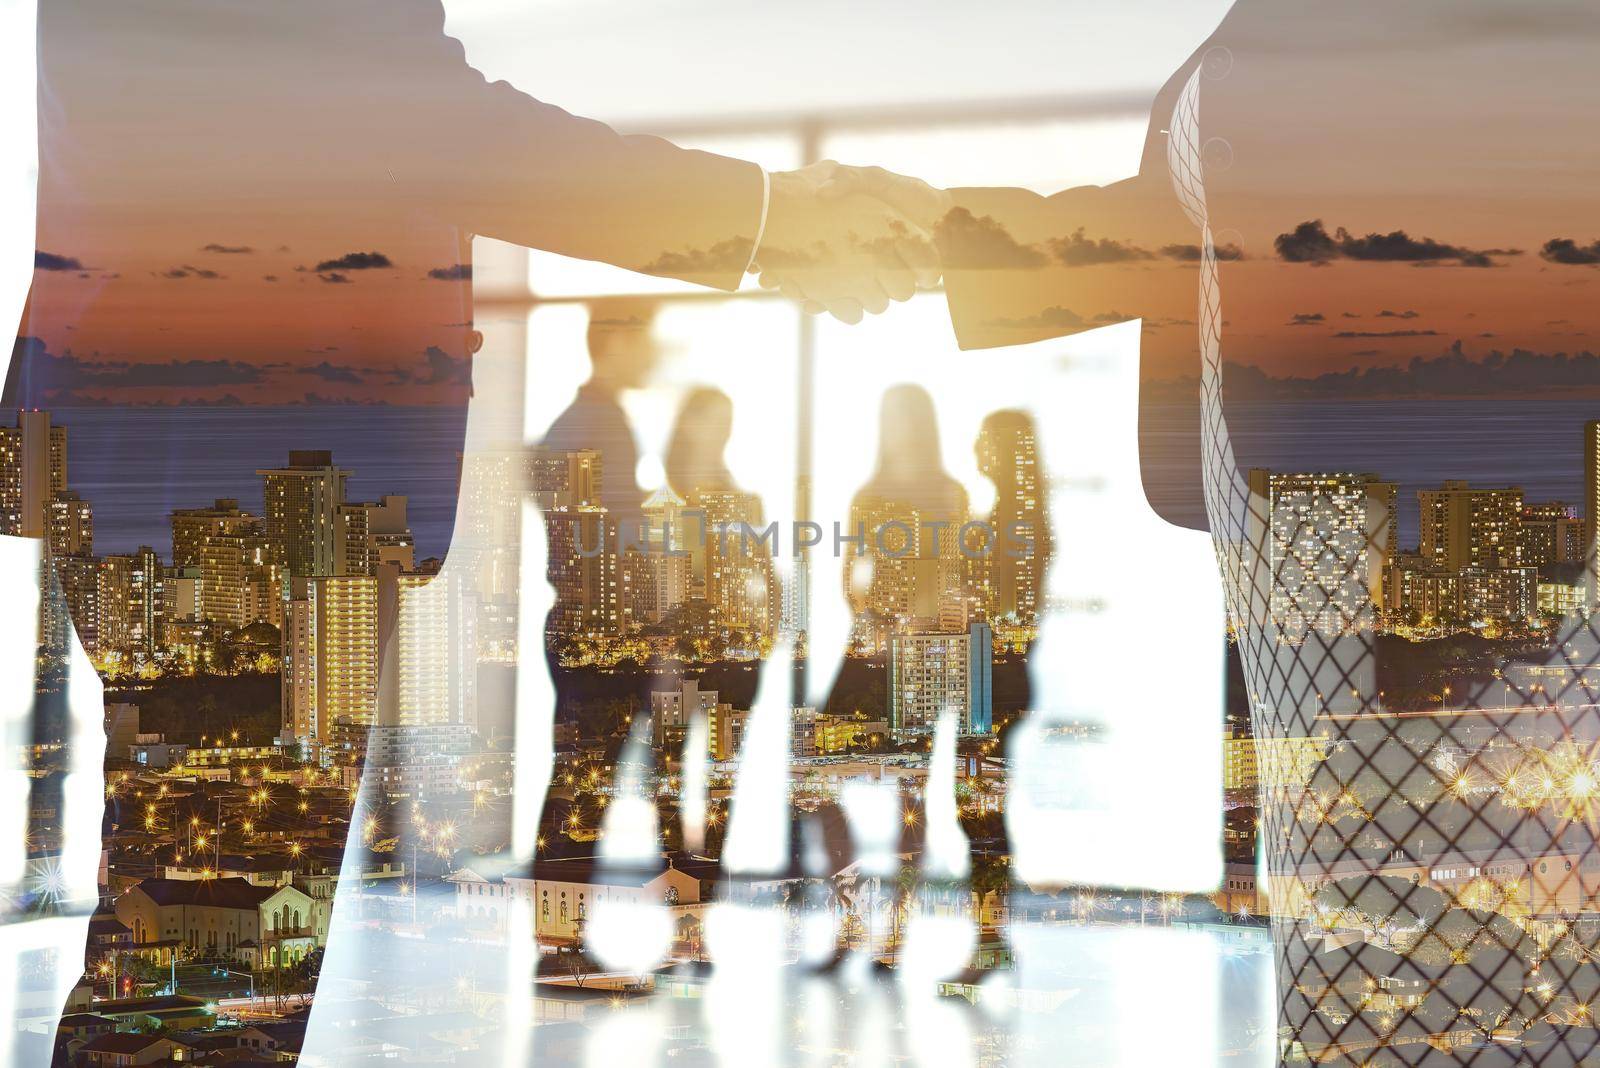 Shot of a city at sunset superimposed over businesspeople shaking hands in the boardroom.